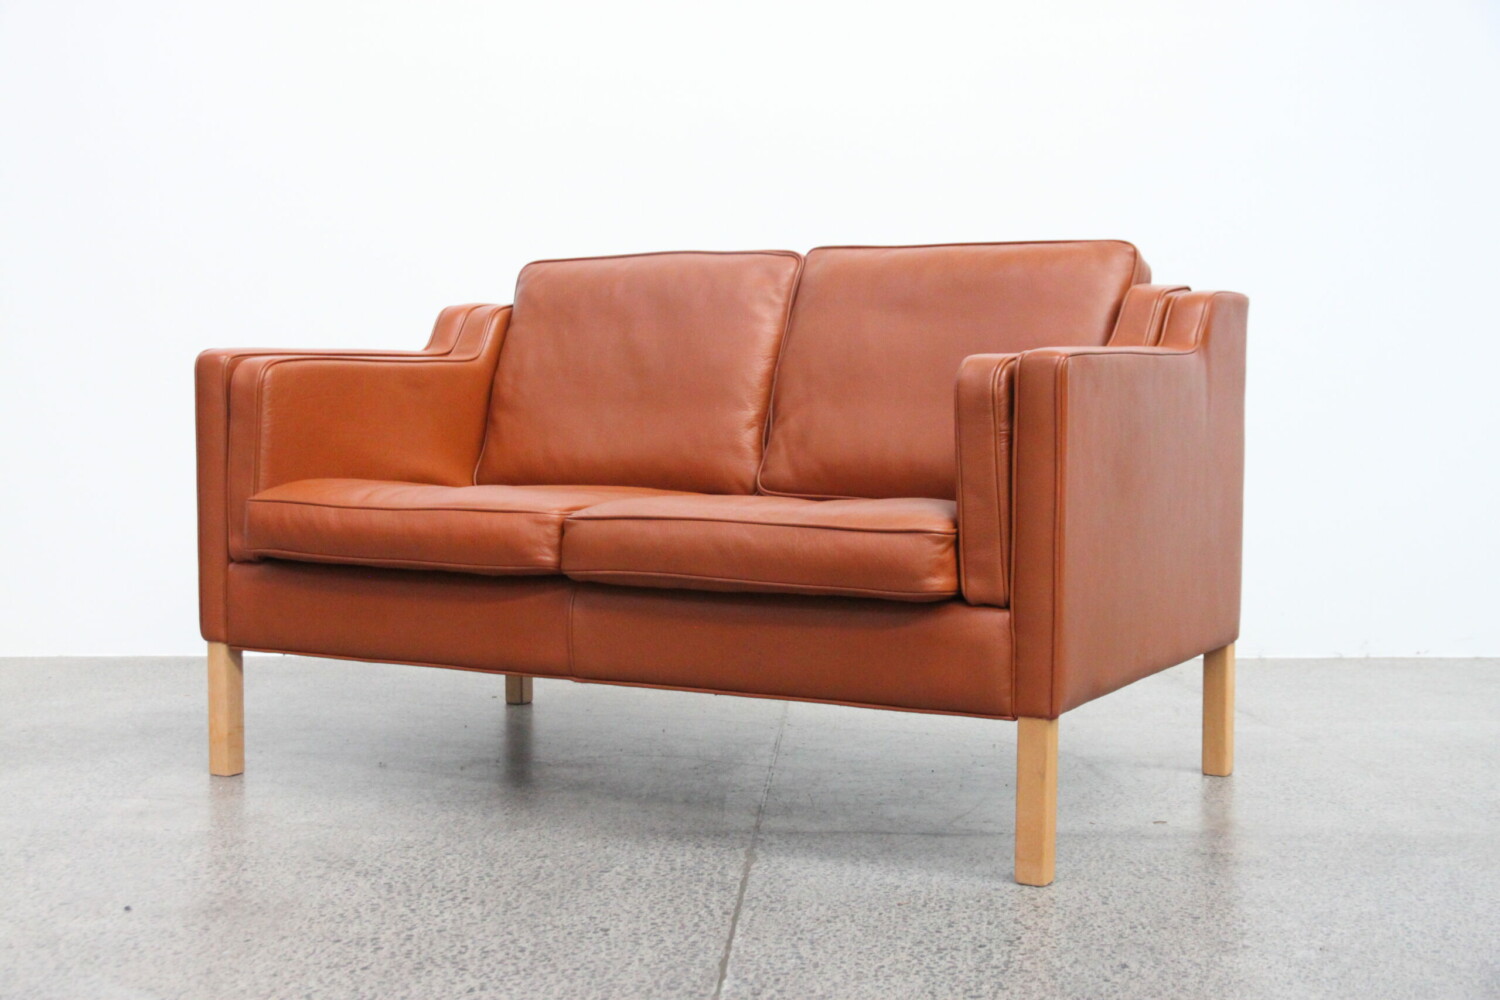 Pair of Tan Sofas with Stool by Stouby